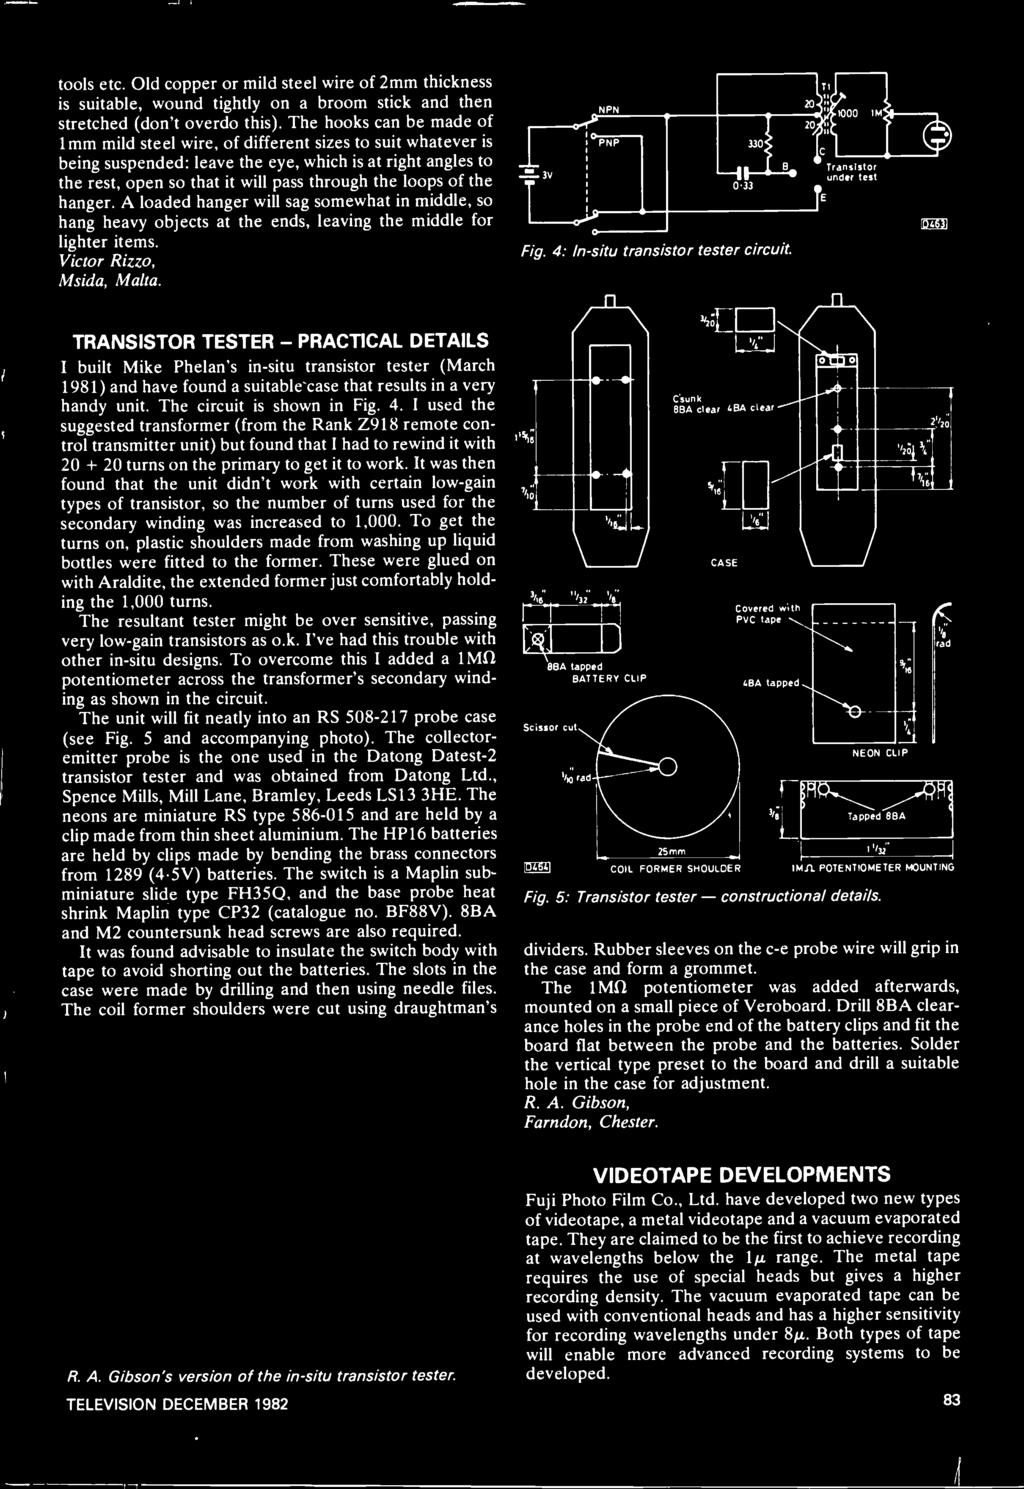 E Transistor under test TRANSISTOR TESTER - PRACTICAL DETAILS I built Mike Phelan's in -situ transistor tester (March 1981) and have found a suitable case that results in a very handy unit.